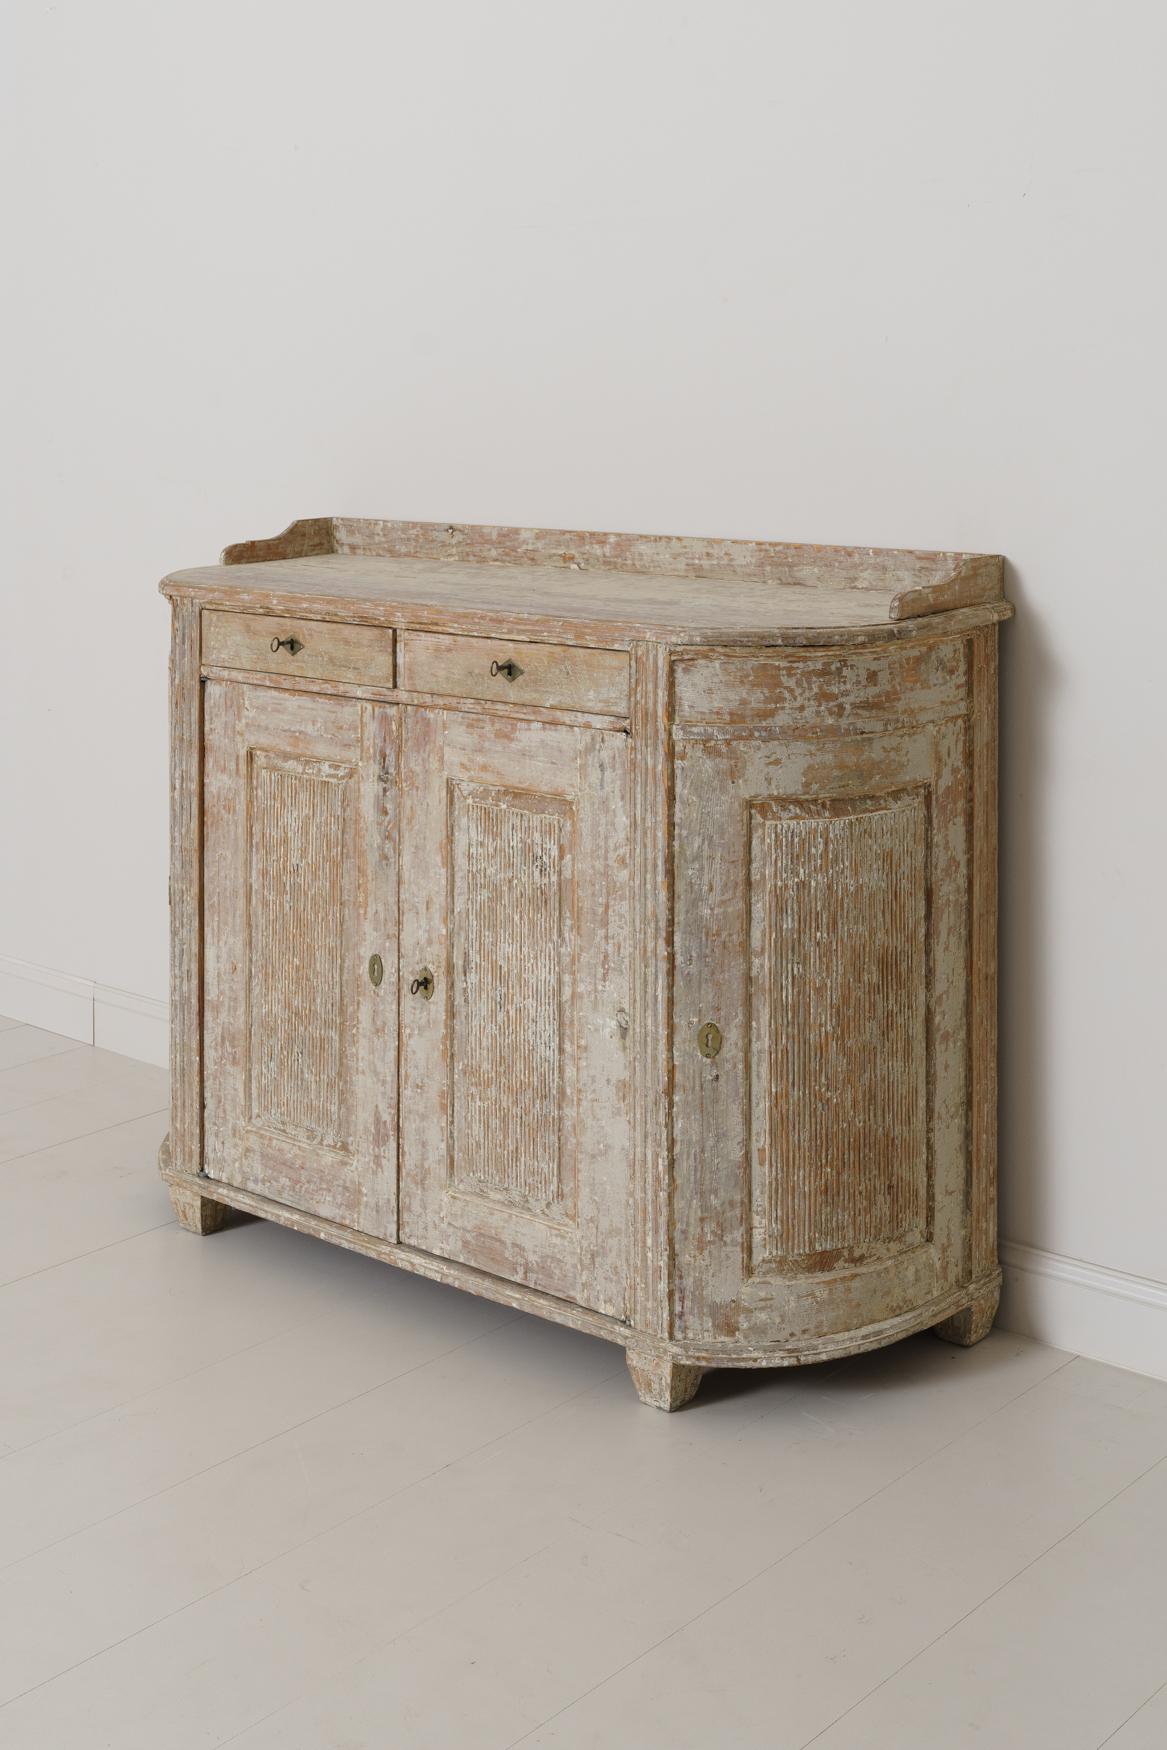 Wood 18th Century Swedish Gustavian Period Buffet In Original Paint with Reeded Doors